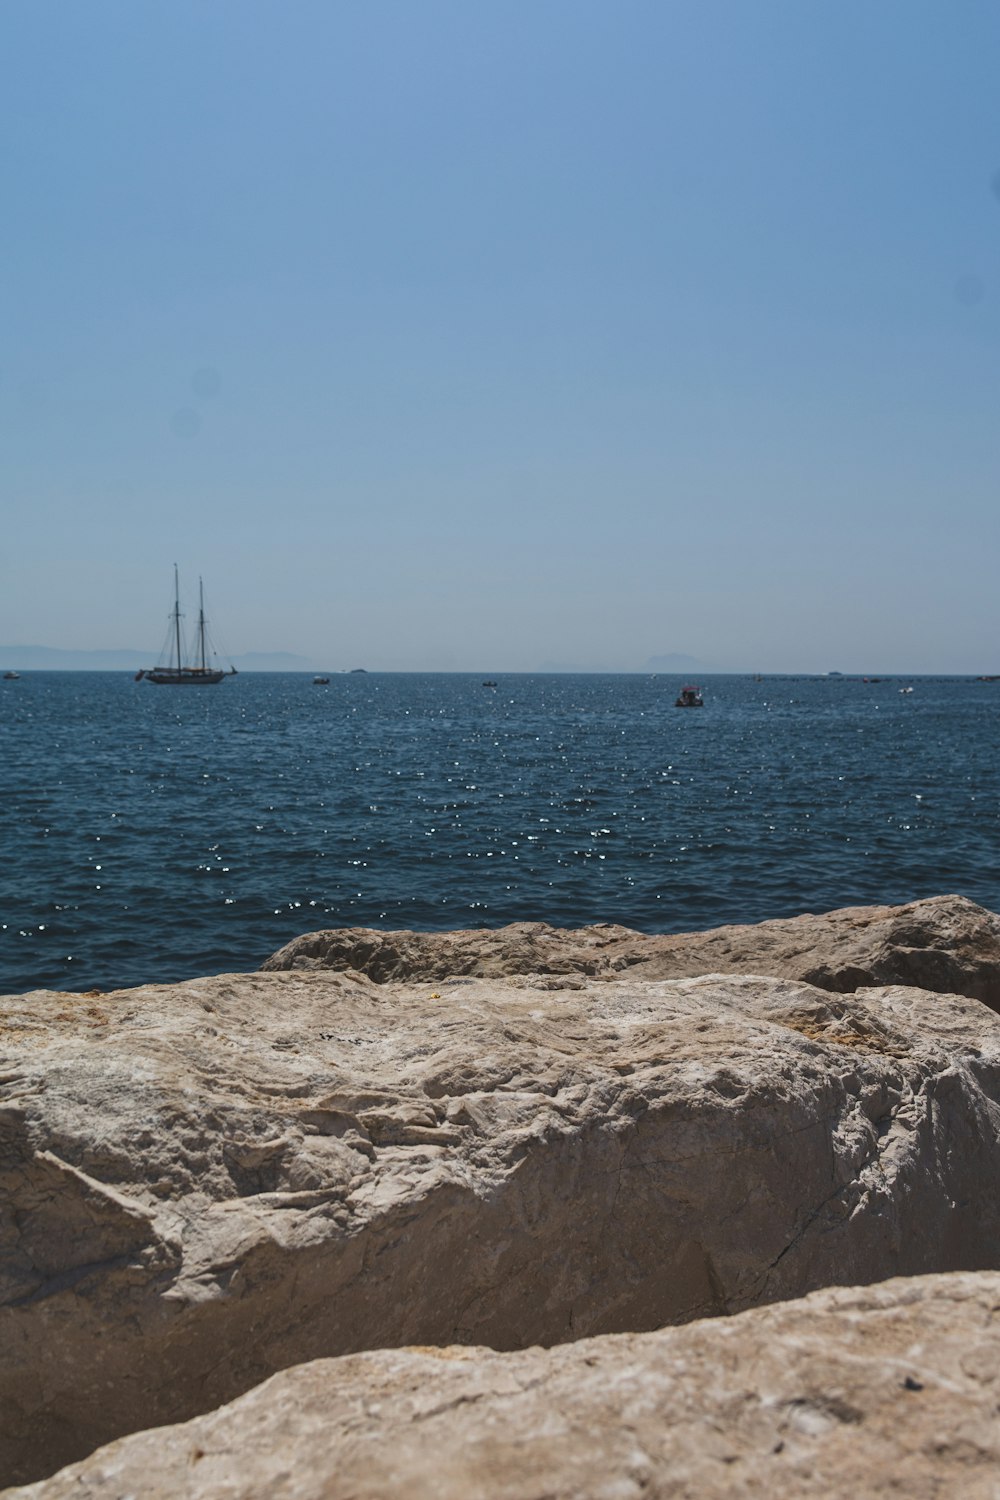 a sailboat is out in the distance on the water